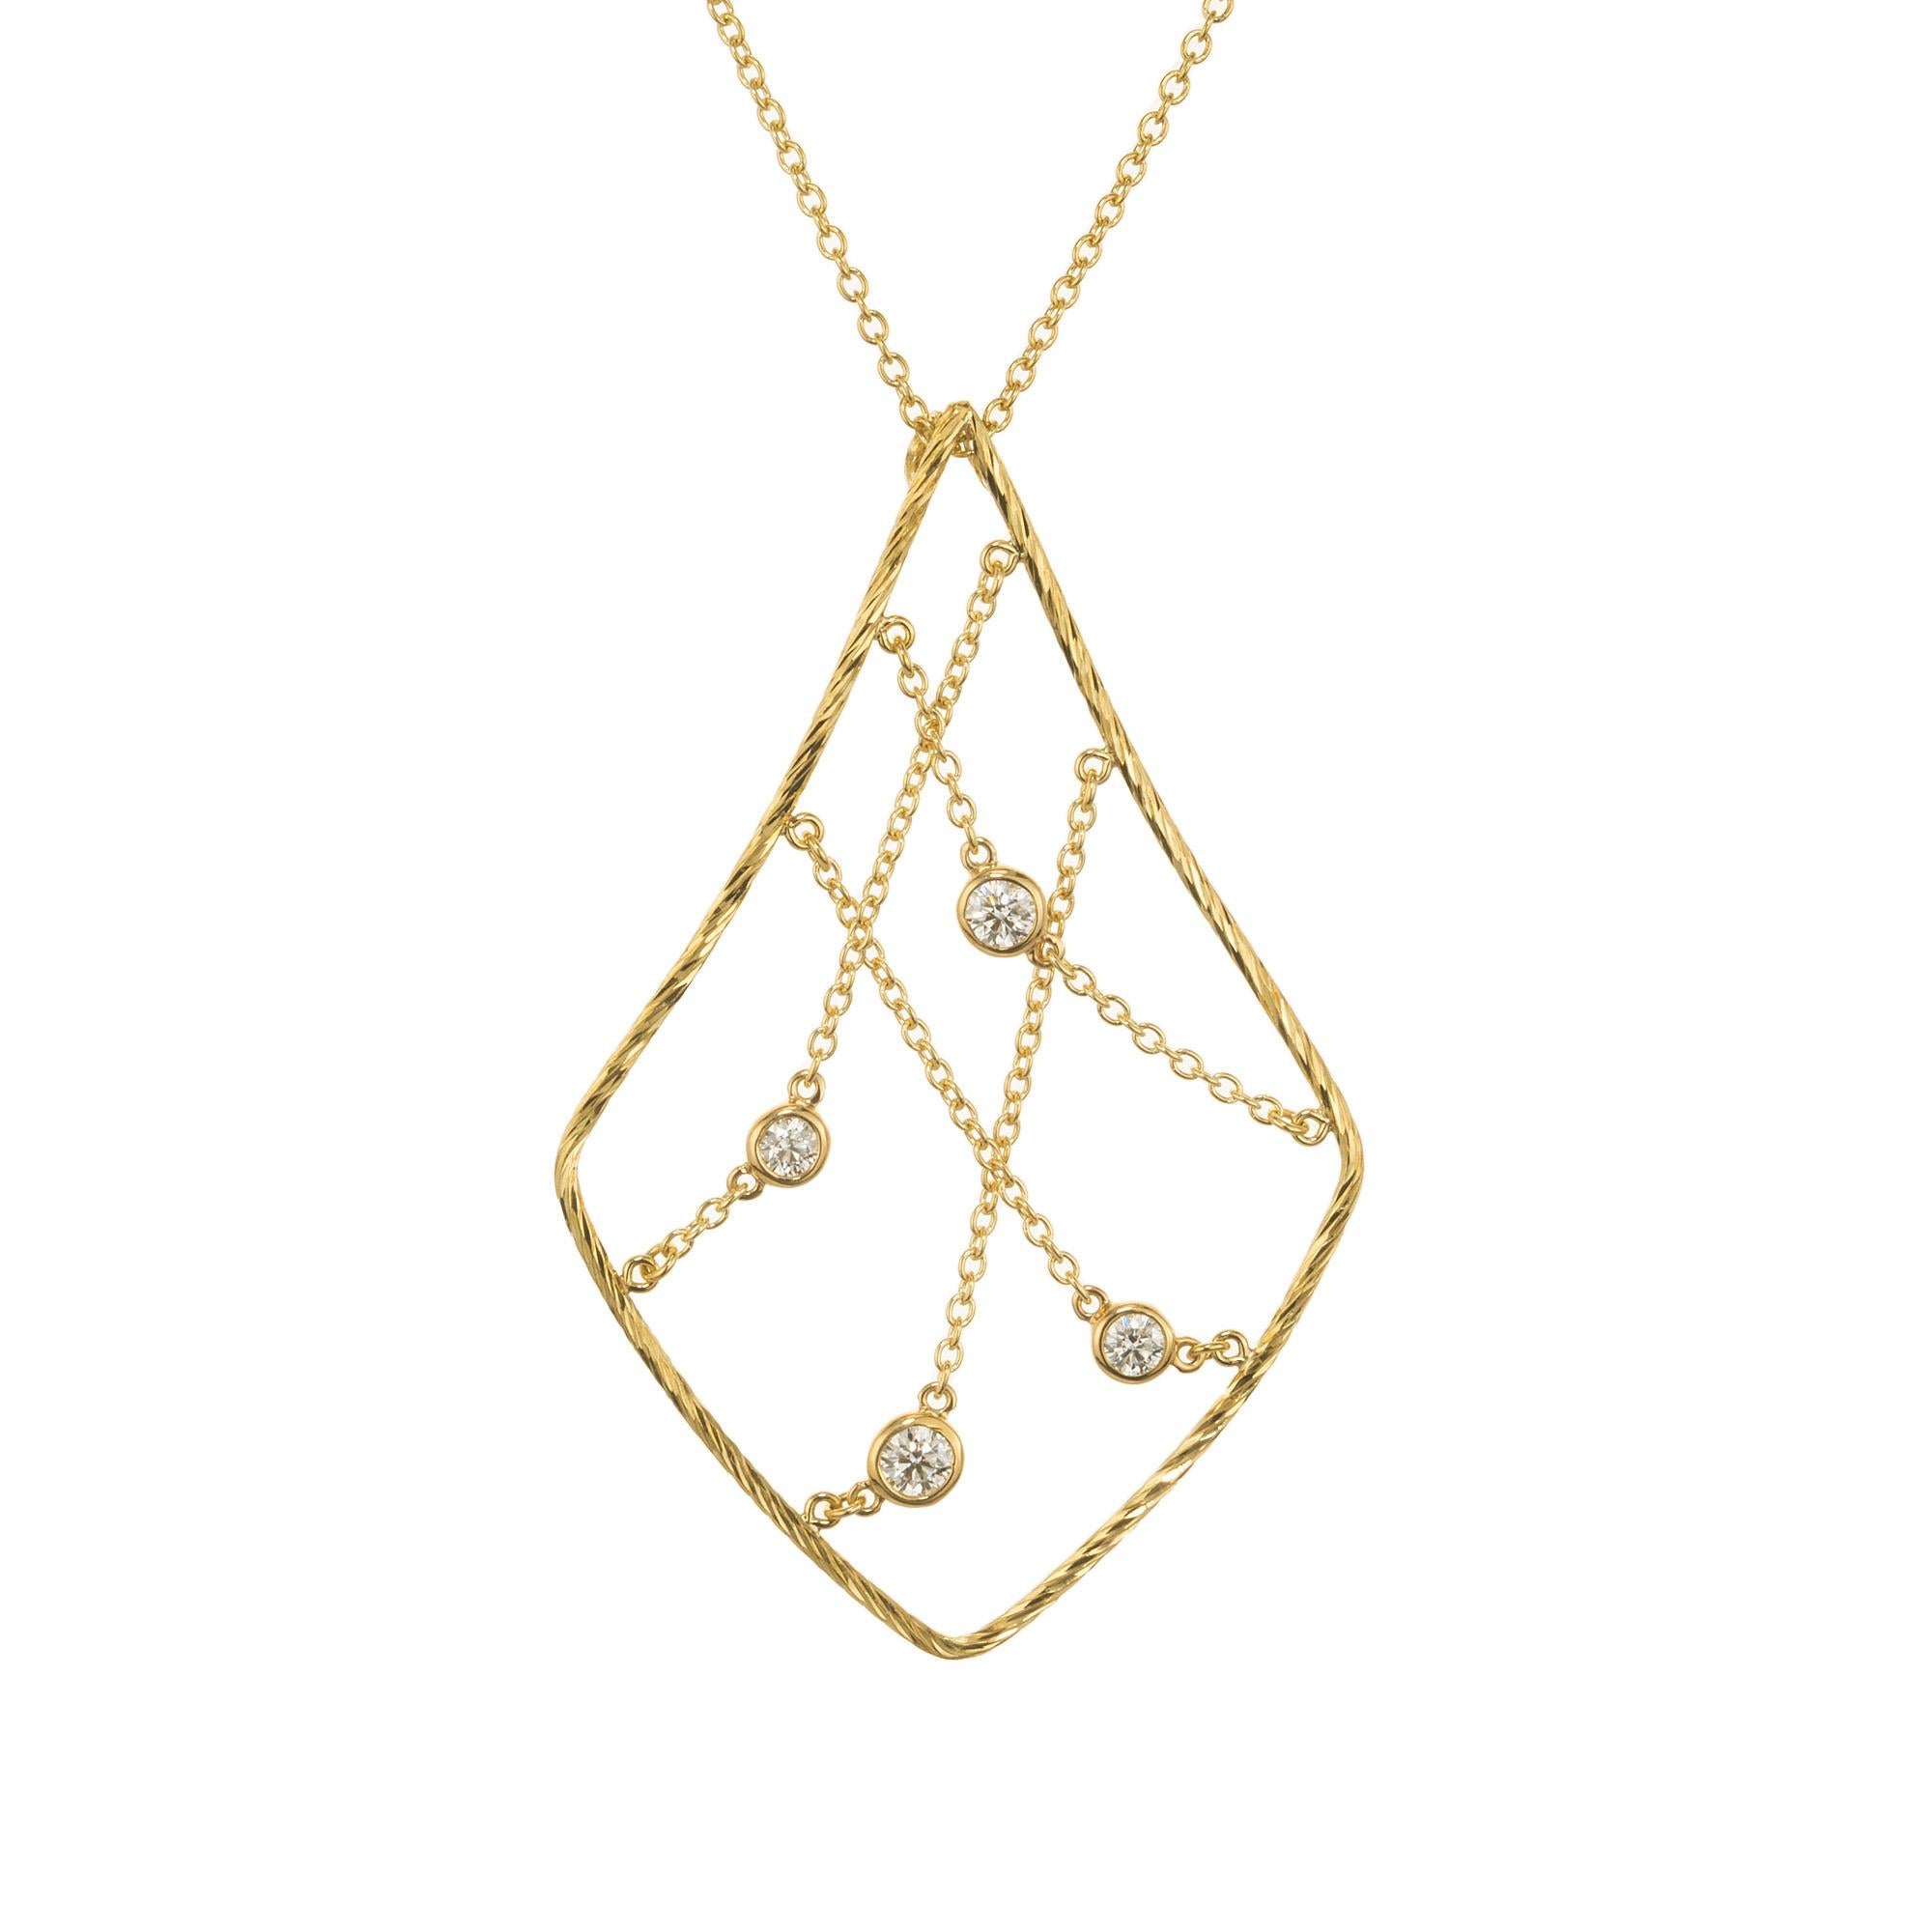 An energetic contemporary Hearts On Fire pendant with 4 ideal cut round diamonds with a weight of .33 carats set in 18k yellow gold. The piece features a kite shaped rim with bezel-set diamonds and curb link chains that move and shift along with the